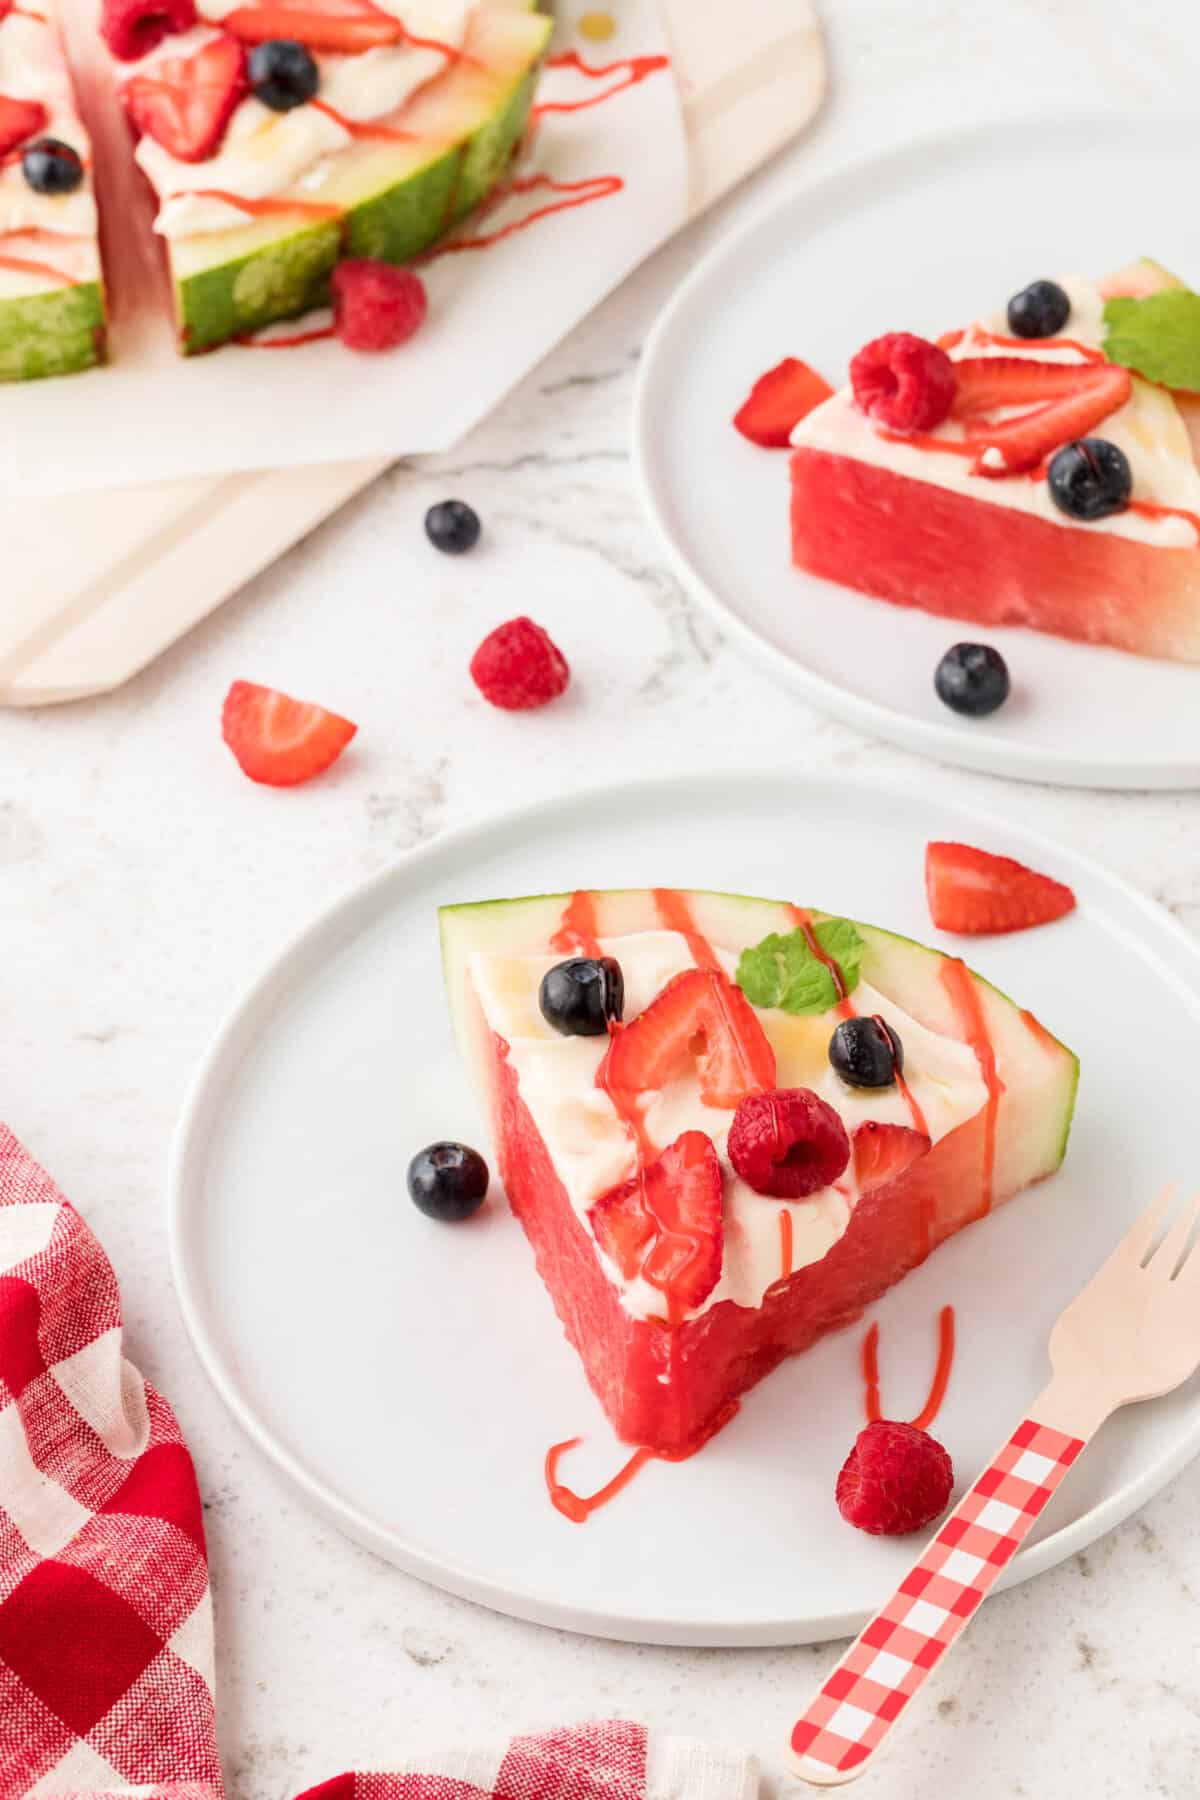 A slice of watermelon sprinkled with whipped cream, fresh berries and strawberries on a serving plate.